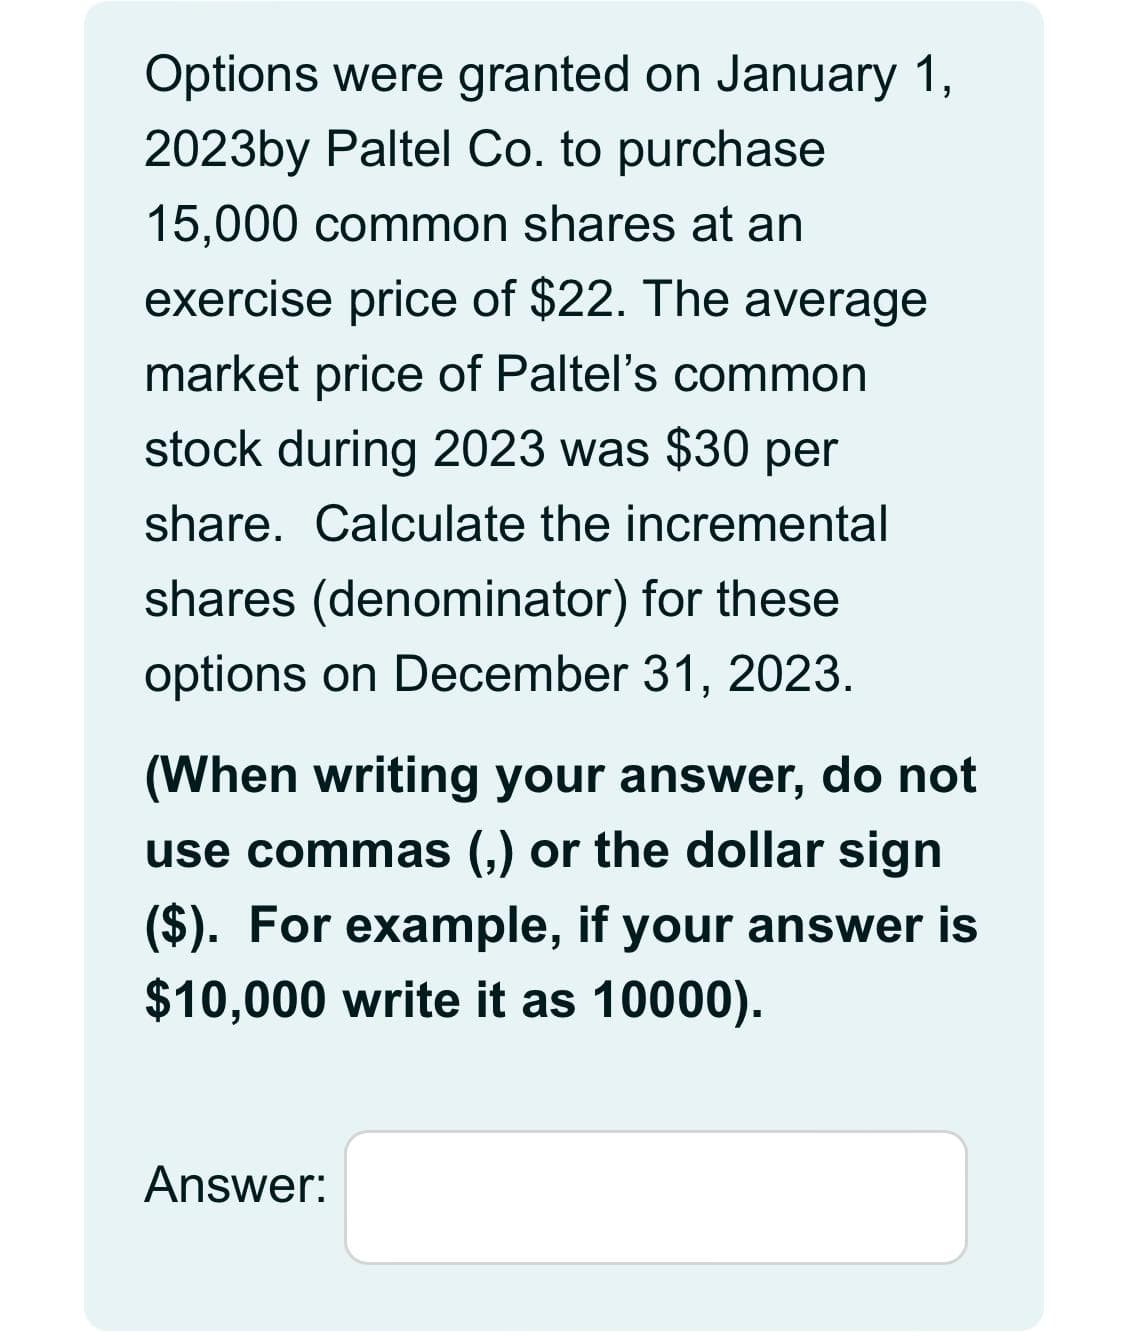 Options were granted on January 1,
2023by Paltel Co. to purchase
15,000 common shares at an
exercise price of $22. The average
market price of Paltel's common
stock during 2023 was $30 per
share. Calculate the incremental
shares (denominator) for these
options on December 31, 2023.
(When writing your answer, do not
use commas (,) or the dollar sign
($). For example, if your answer is
$10,000 write it as 10000).
Answer: